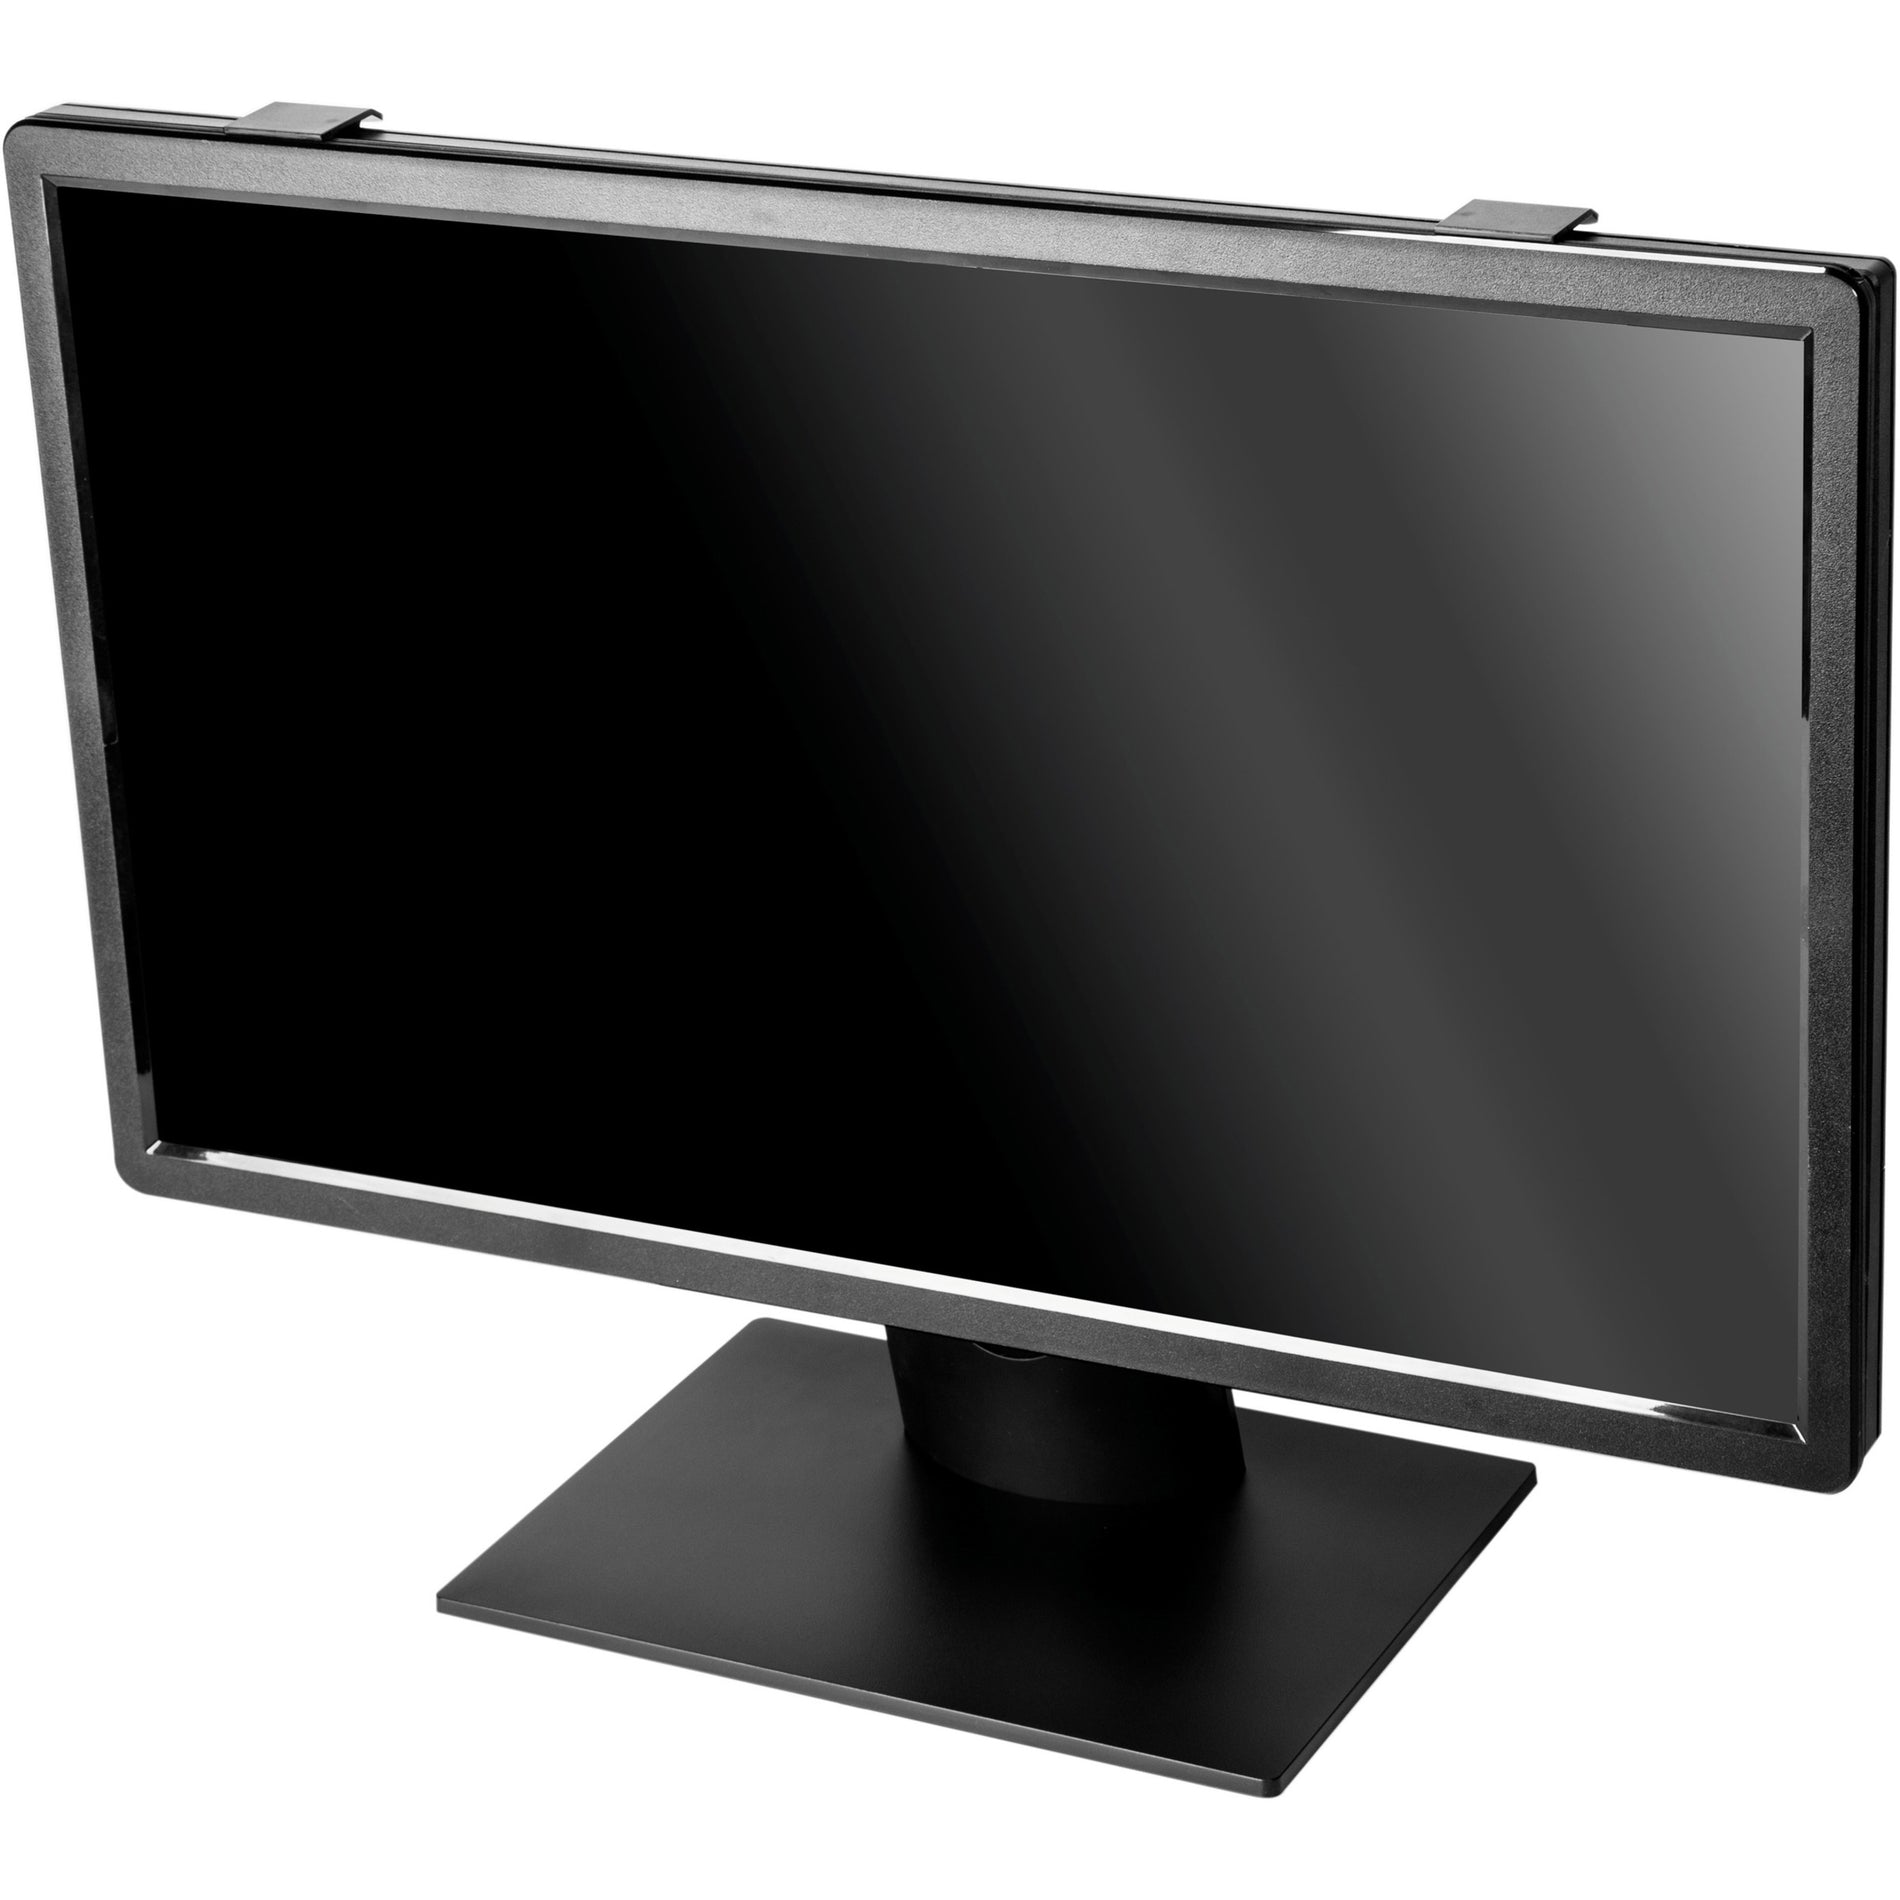 Rocstor PV0026-B1 PrivacyView Privacy Screen Filter, 22in Widescreen, Anti-glare, Easy to Apply, Black